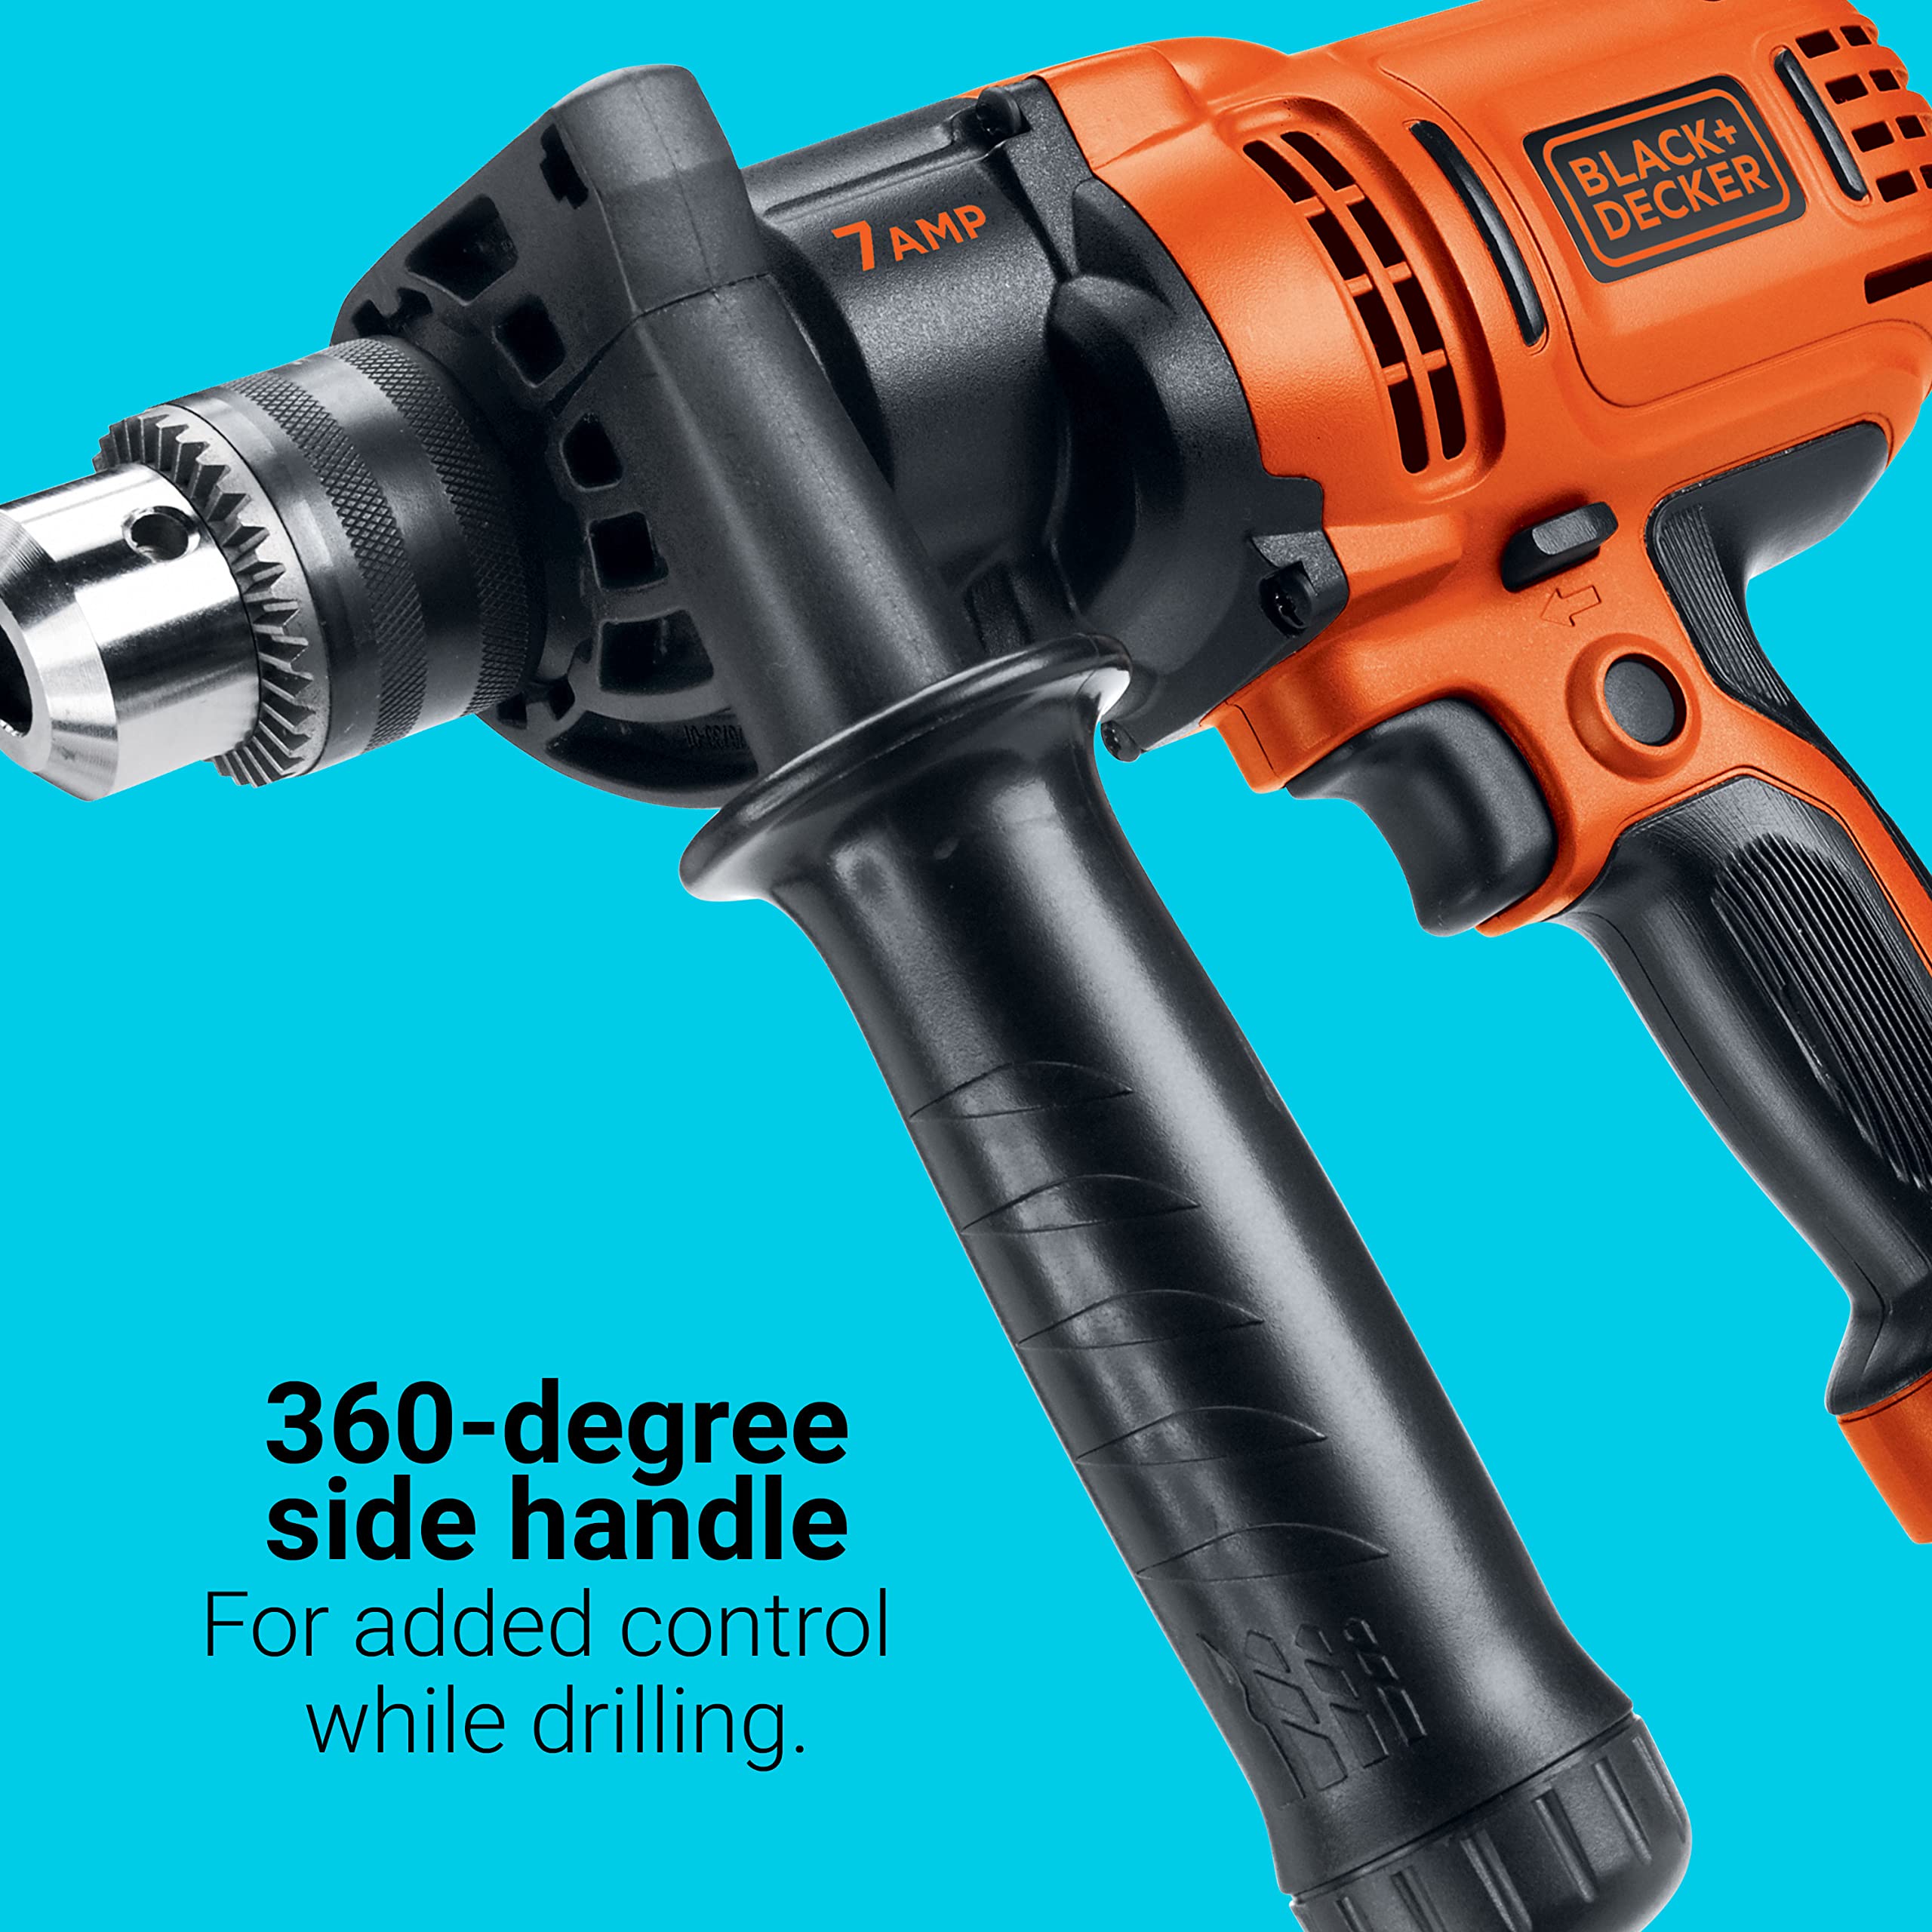 BLACK+DECKER 7.0 Amp 1/2 in. Electric Drill/Driver Kit (DR560)